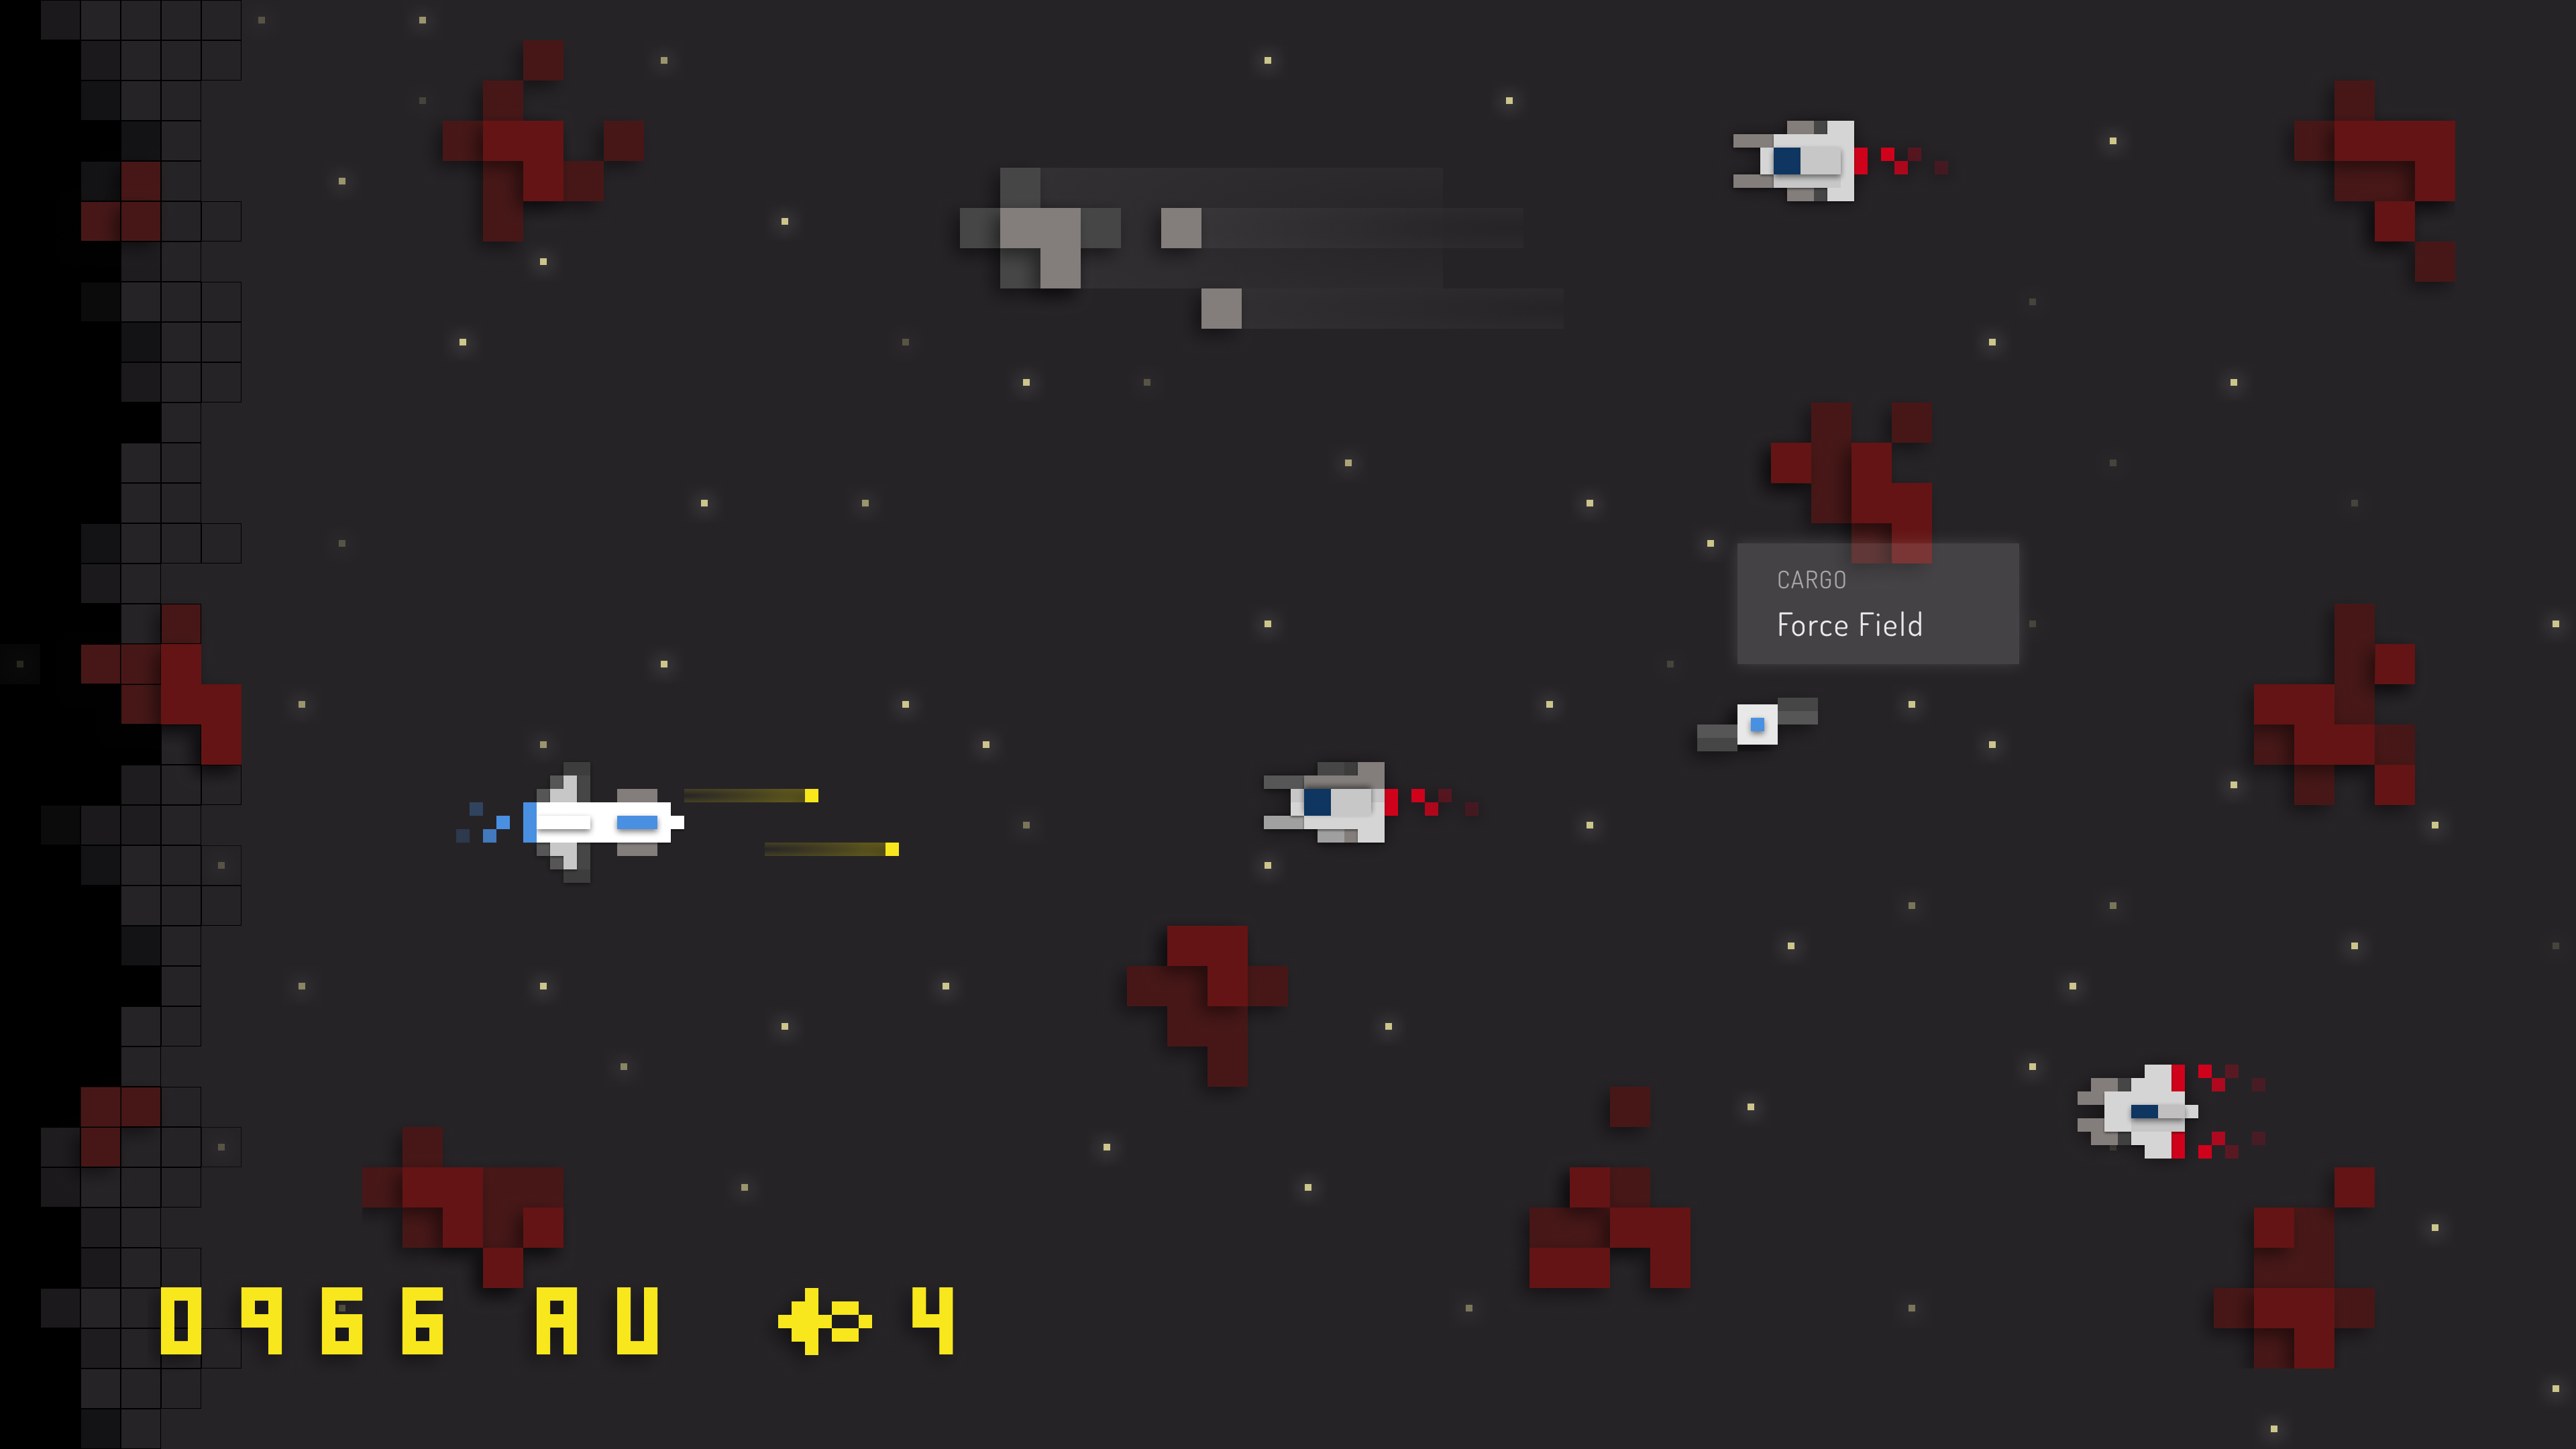 Mockup of the gameplay